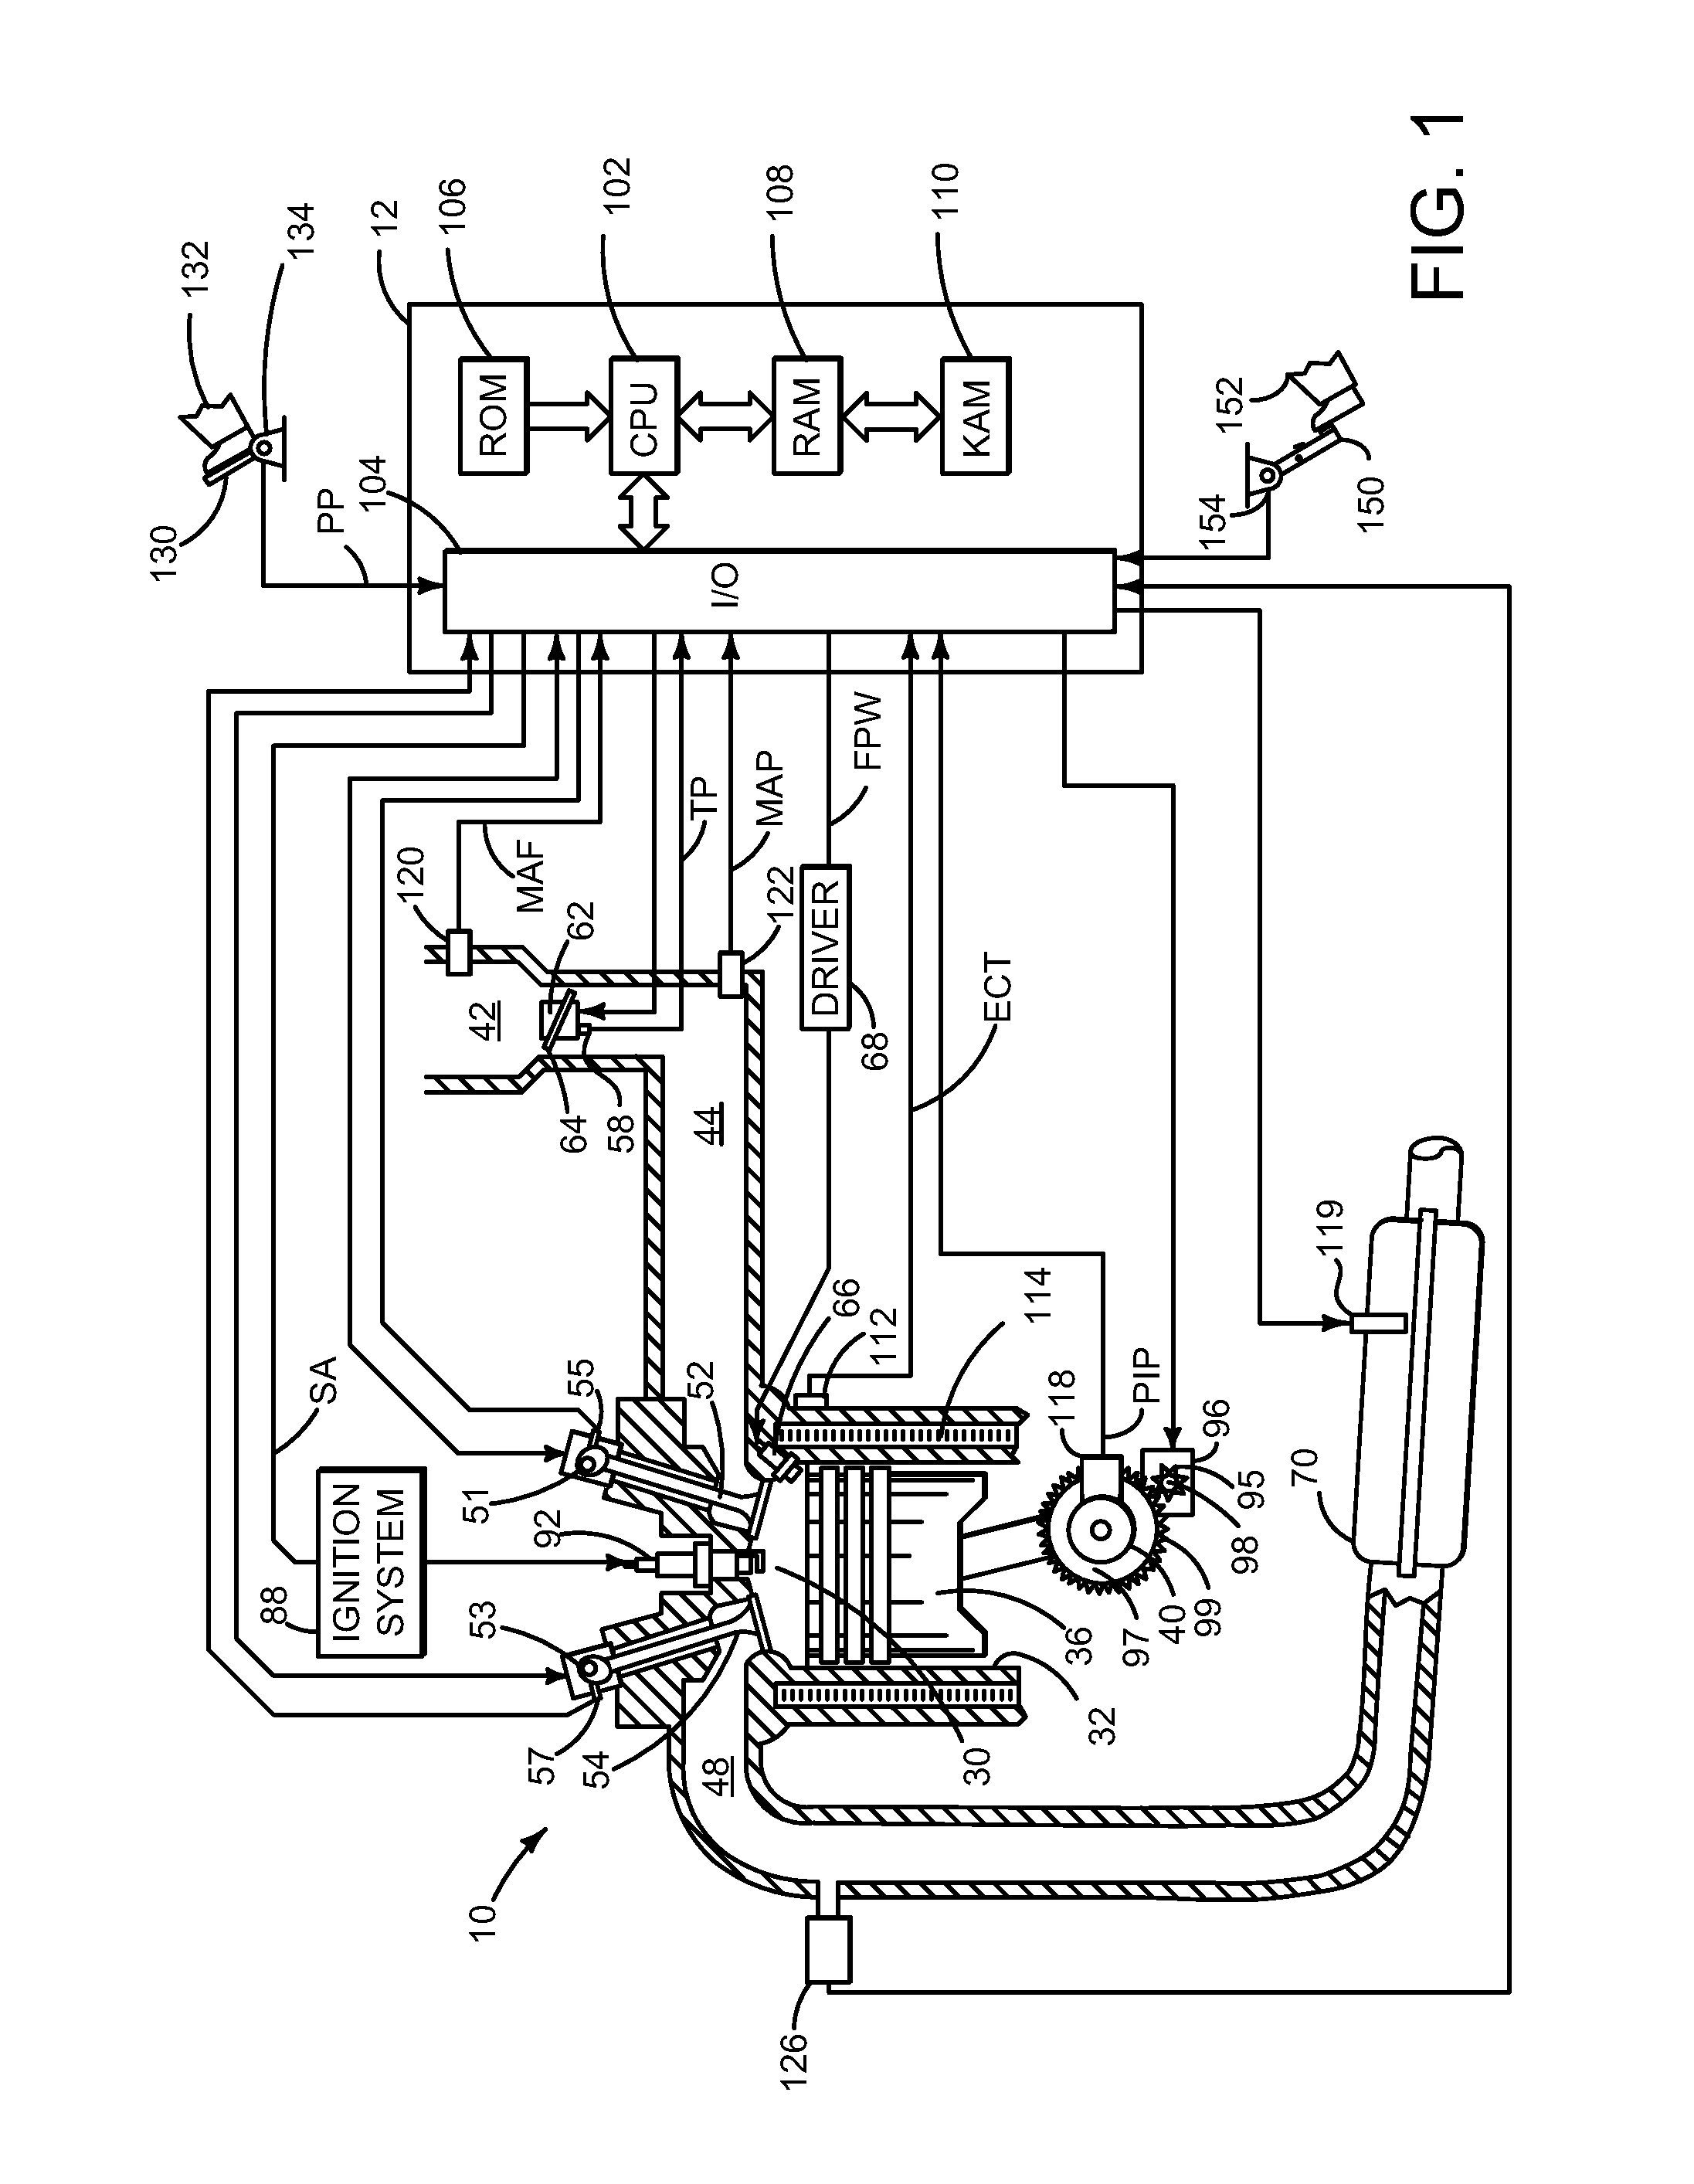 Methods and systems for launching a vehicle